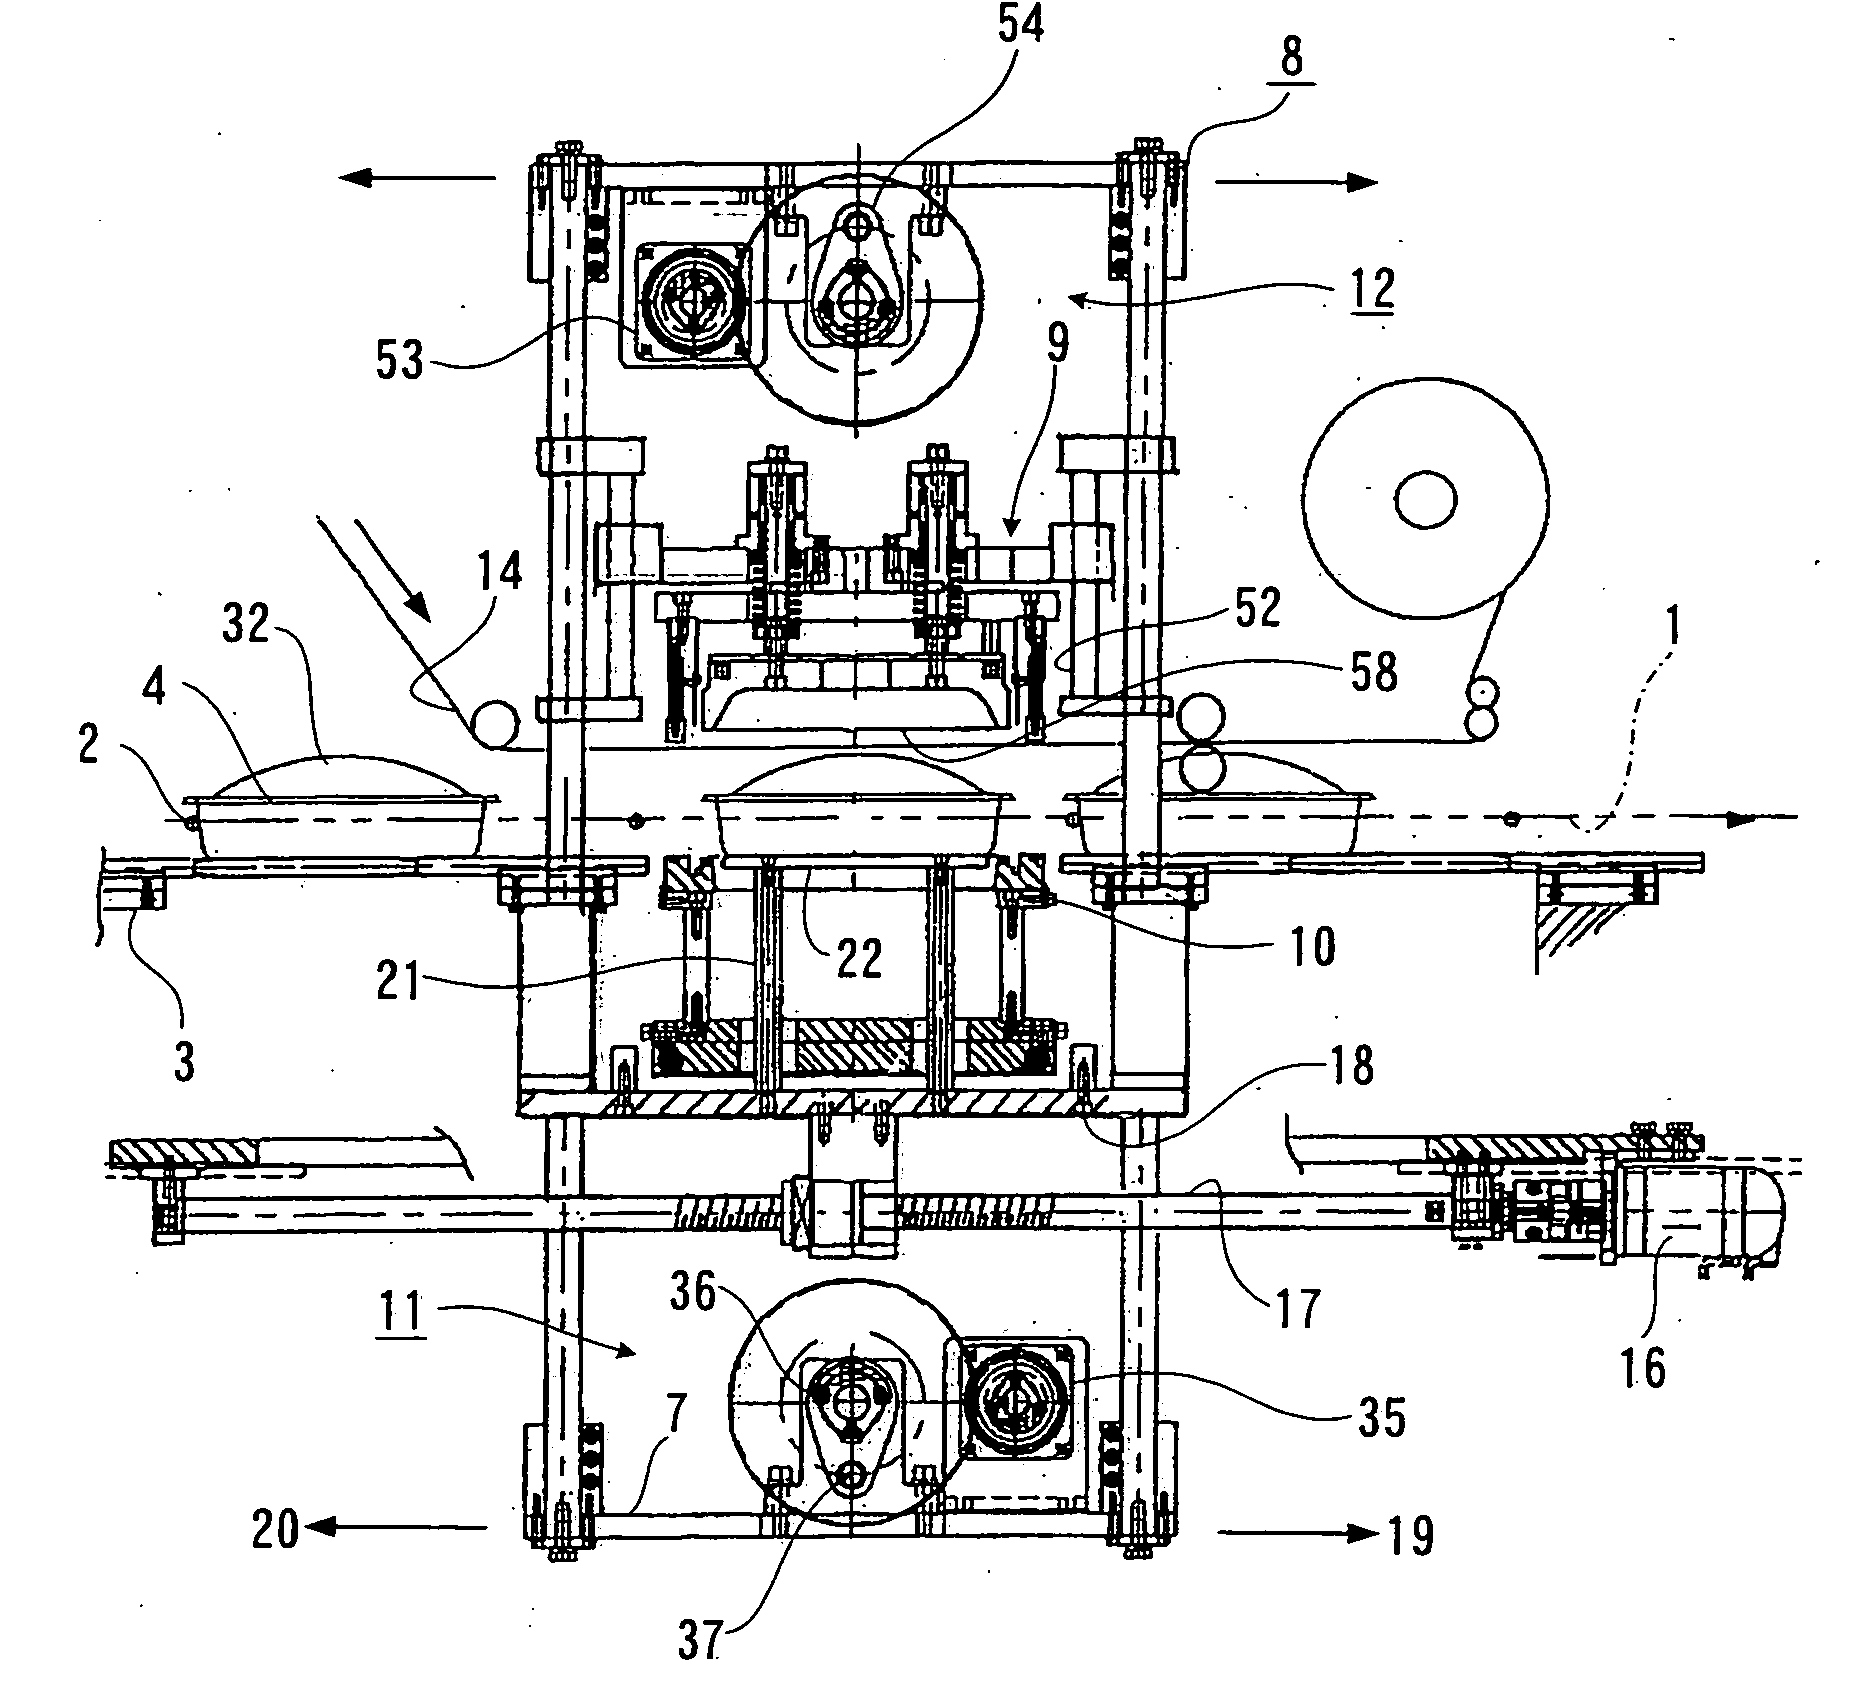 Packaging device for covering and sealing cover film onto tray